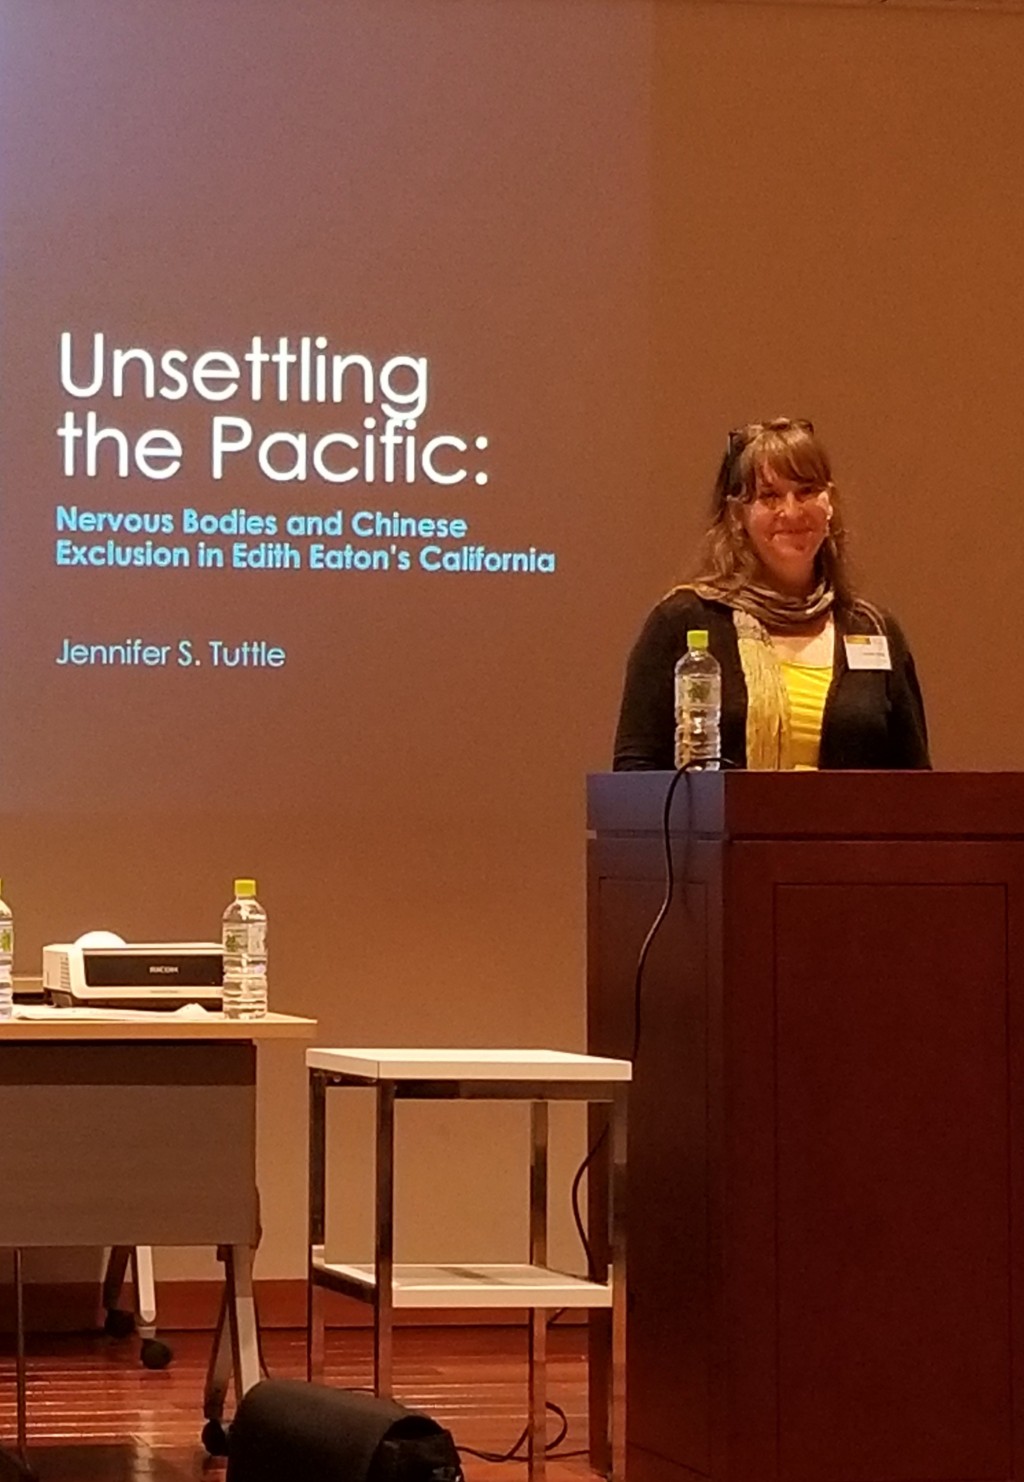 Jennifer Tuttle delivers “Unsettling the Pacific: Nervous Bodies and Chinese Exclusion in Edith Eaton's California,” a presentat